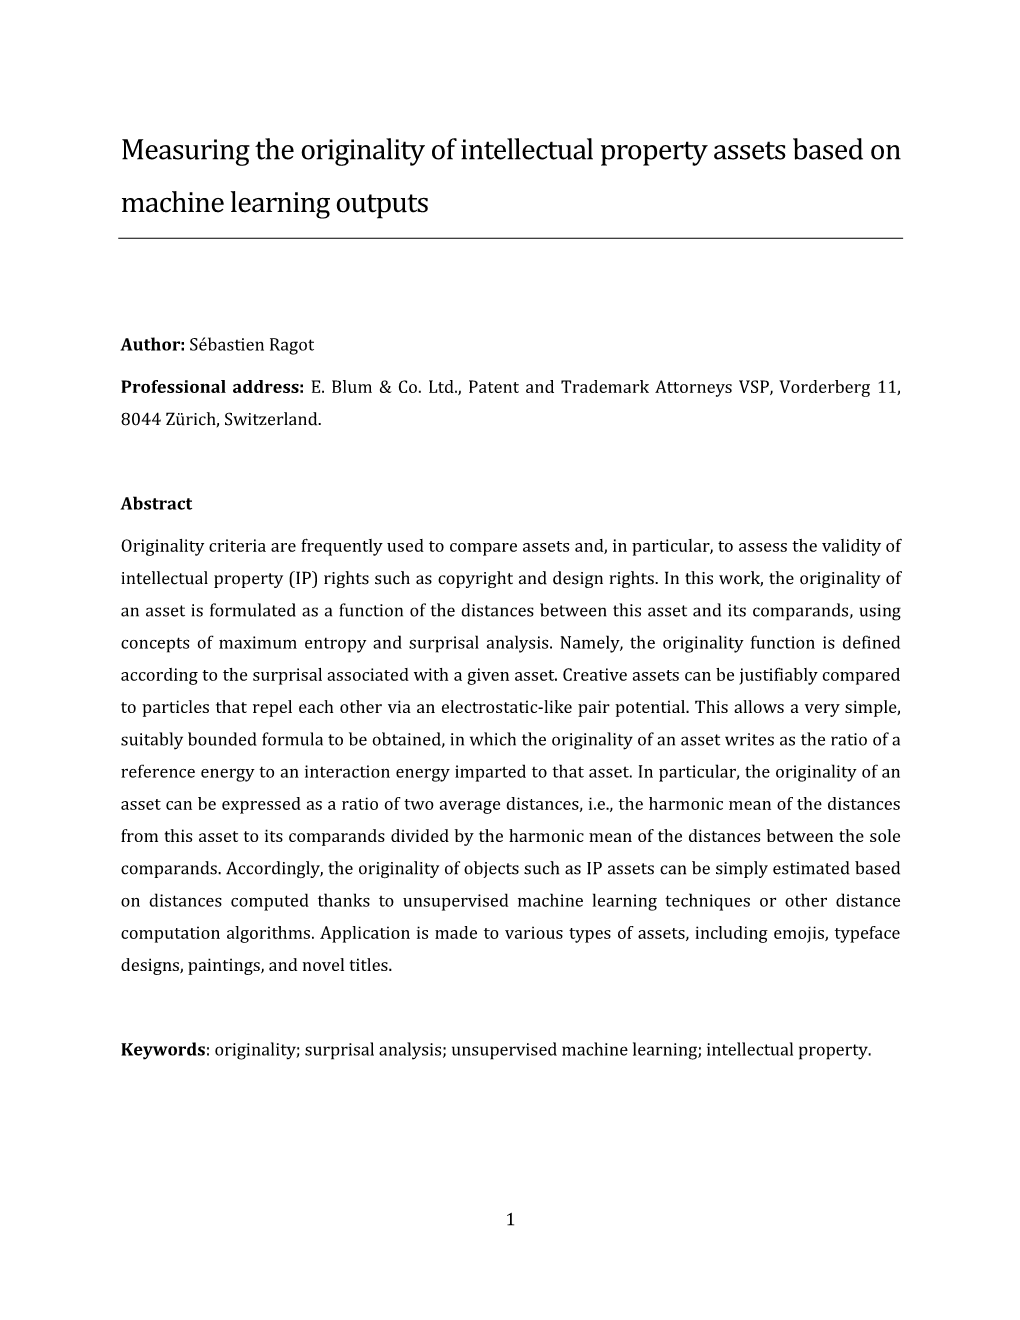 Measuring the Originality of Intellectual Property Assets Based on Machine Learning Outputs